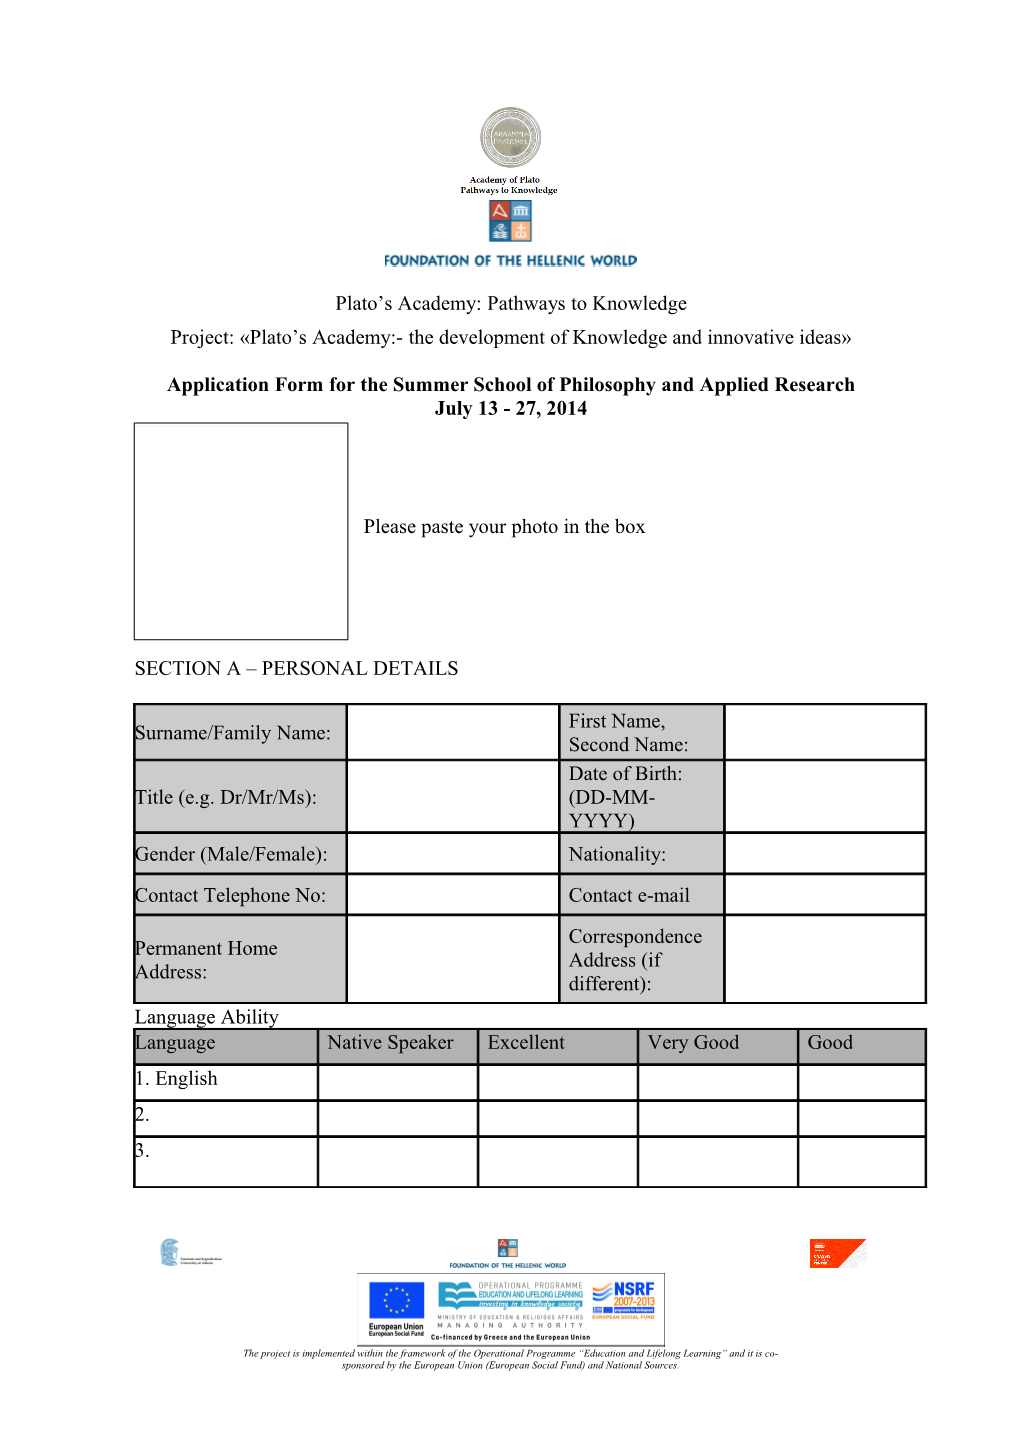 Application Form for the Summer School of Philosophy and Applied Research